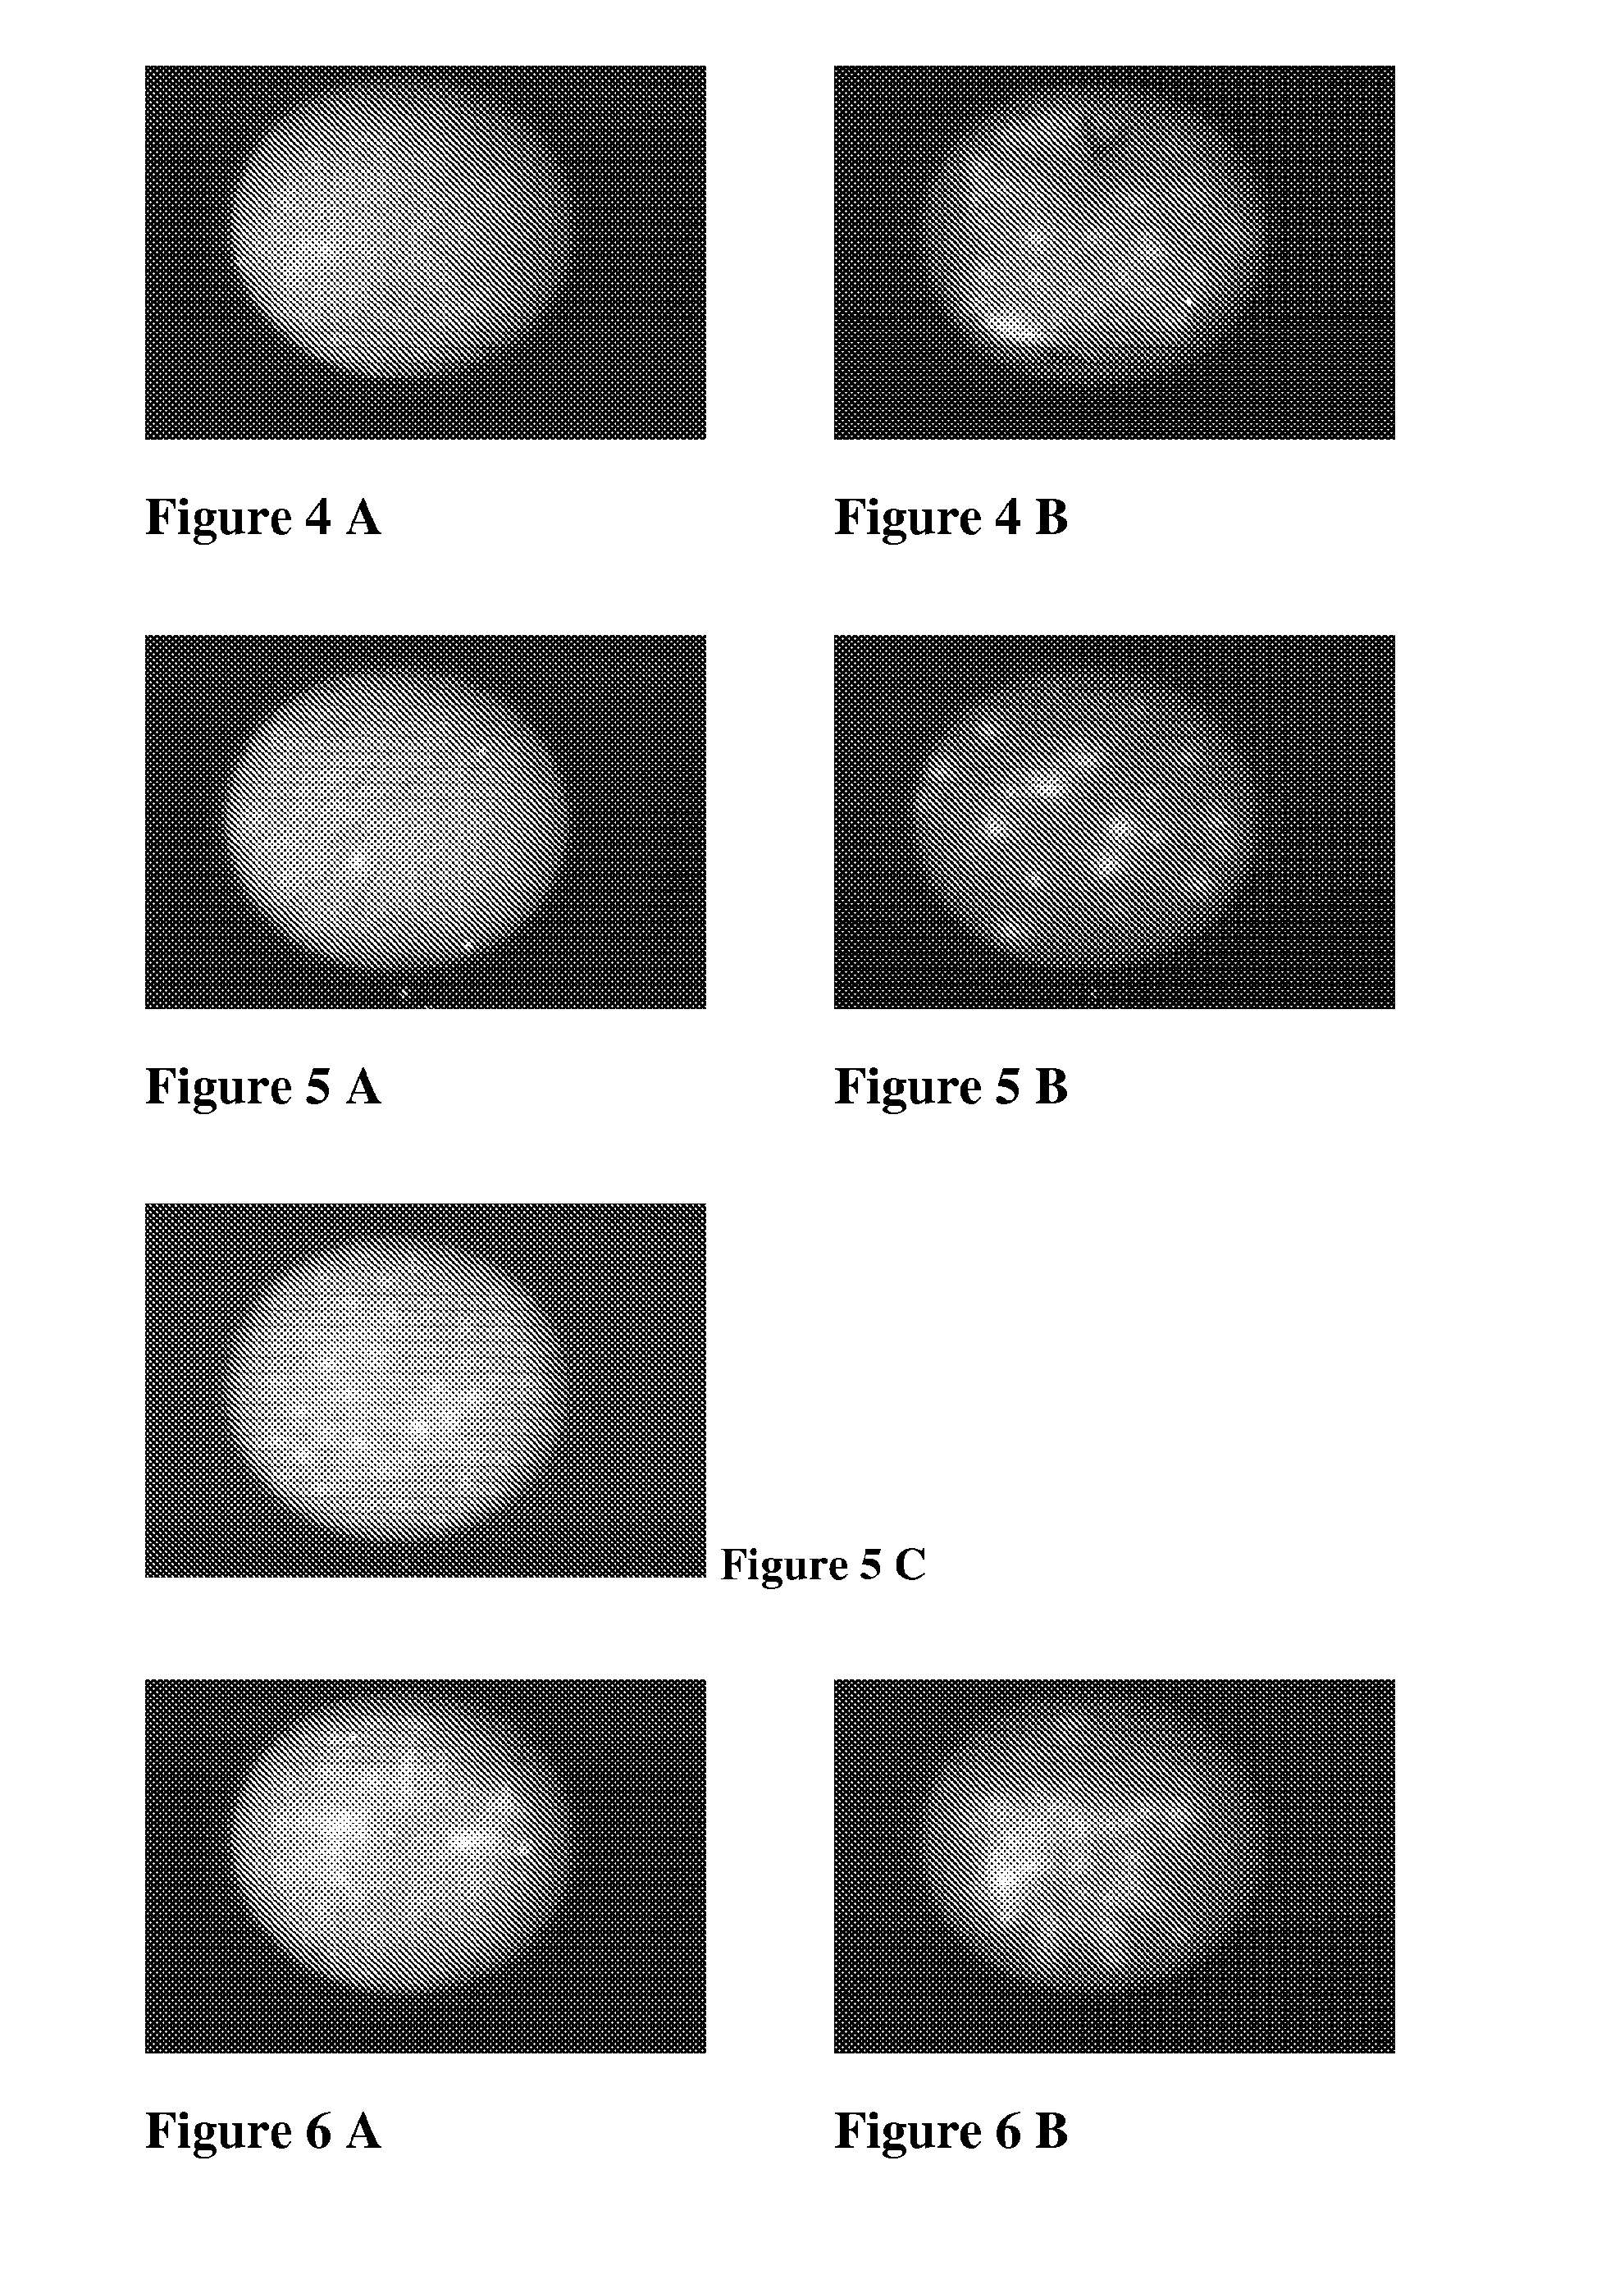 Compounds useful in therapeutic and cosmetic methods